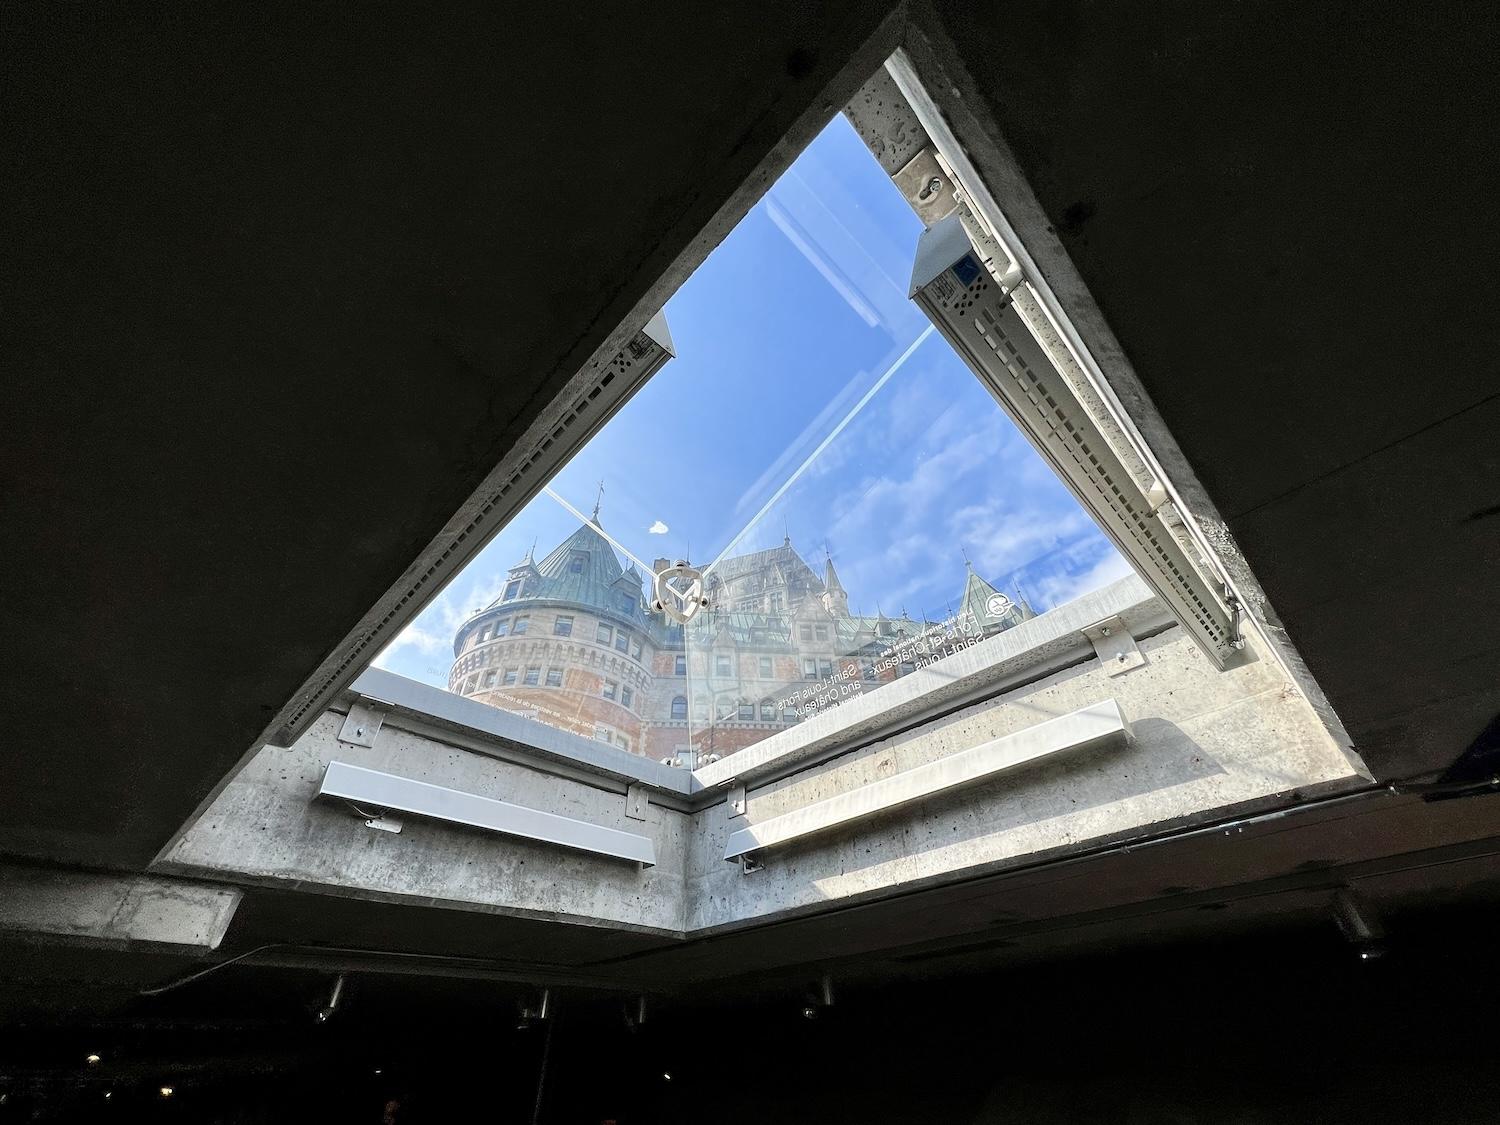 A view of the Fairmont Le Château Frontenac from within Saint-Louis Forts and Châteaux National Historic Site.